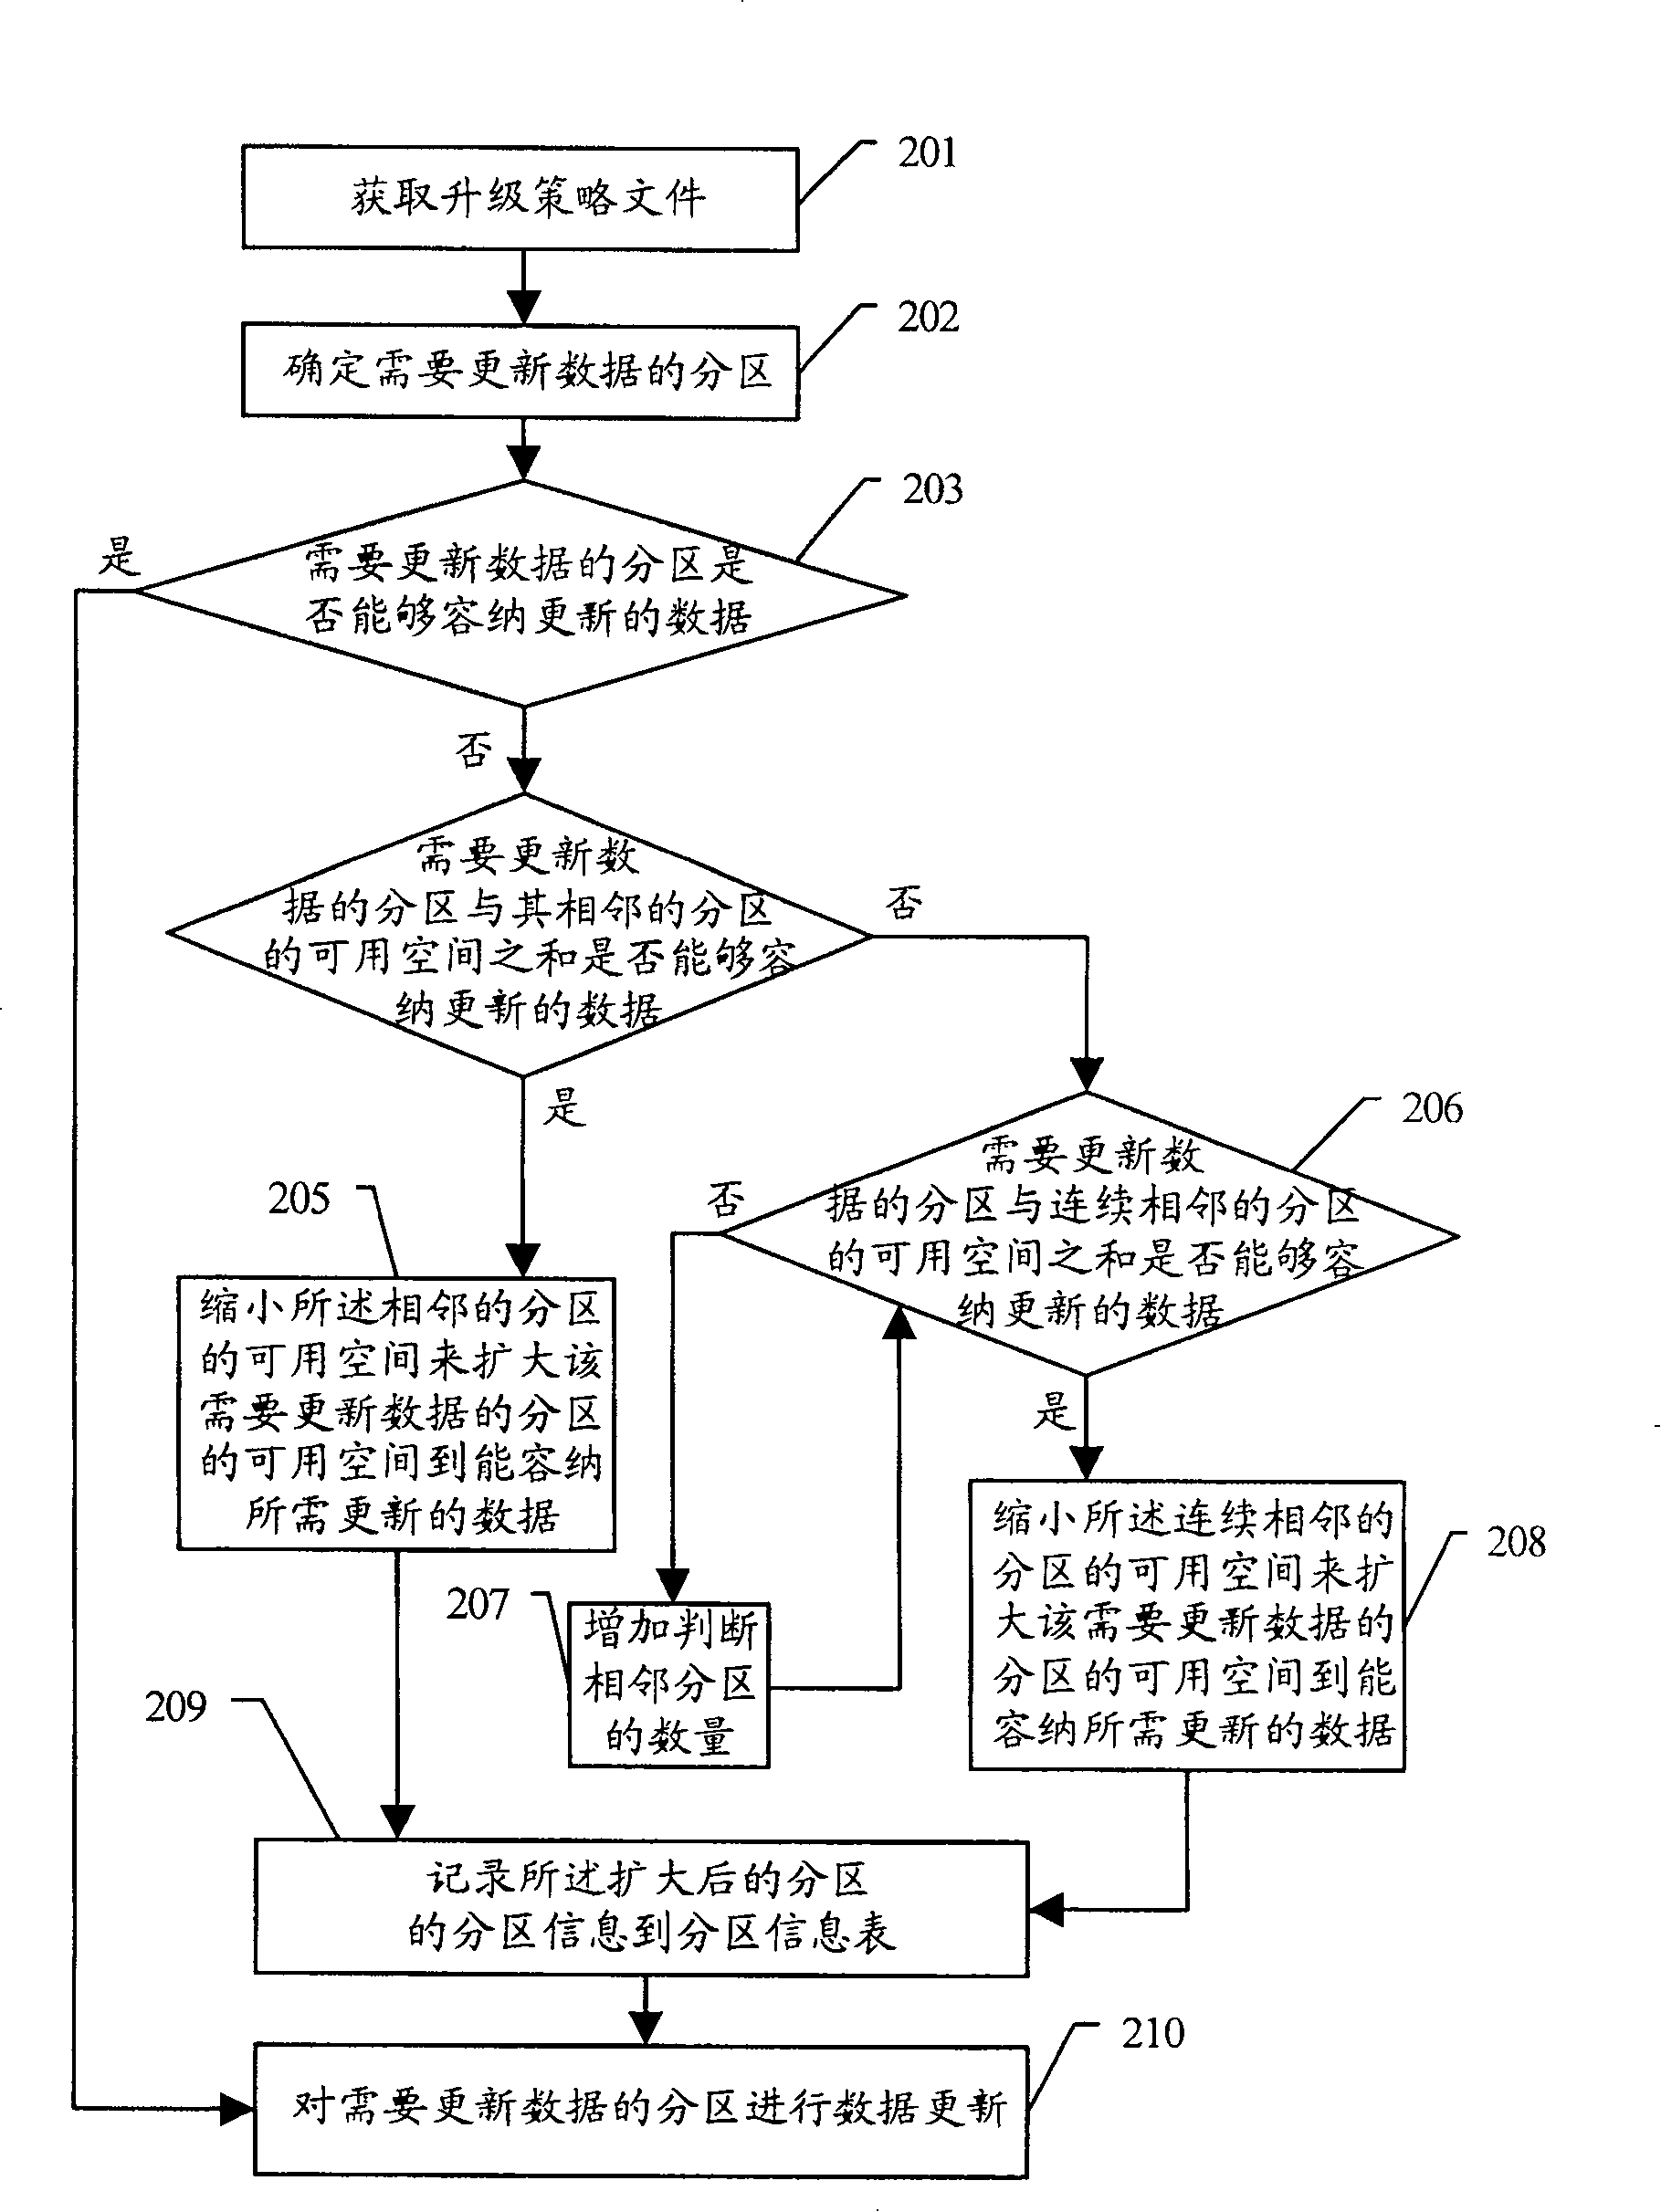 Method and apparatus for updating data